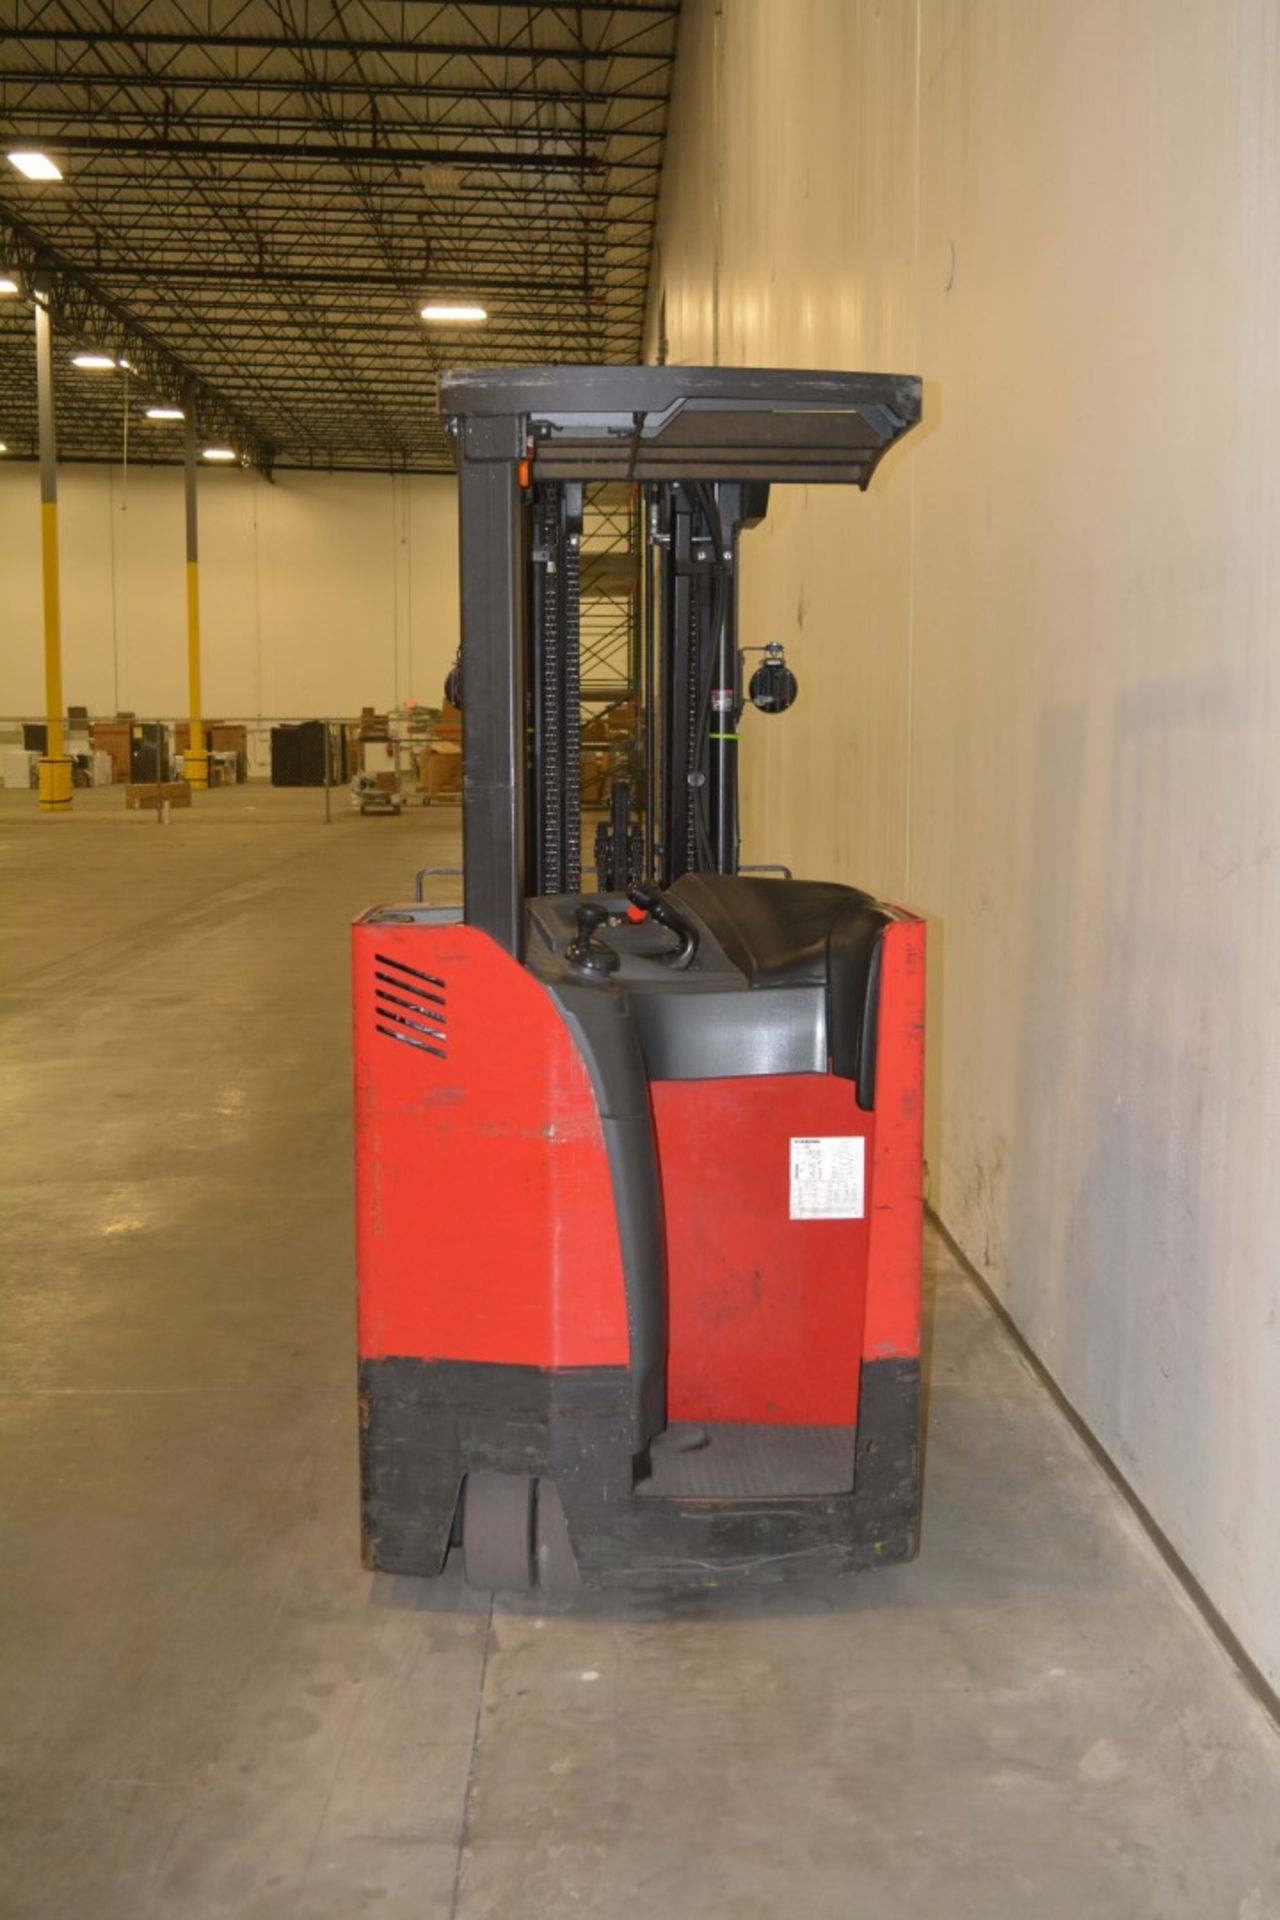 2013 RAYMOND 3500 LBS CAPACITY 4 STAGE ELECTRIC STAND UP FORKLIFT, (WATCH VIDEO) - Image 7 of 8